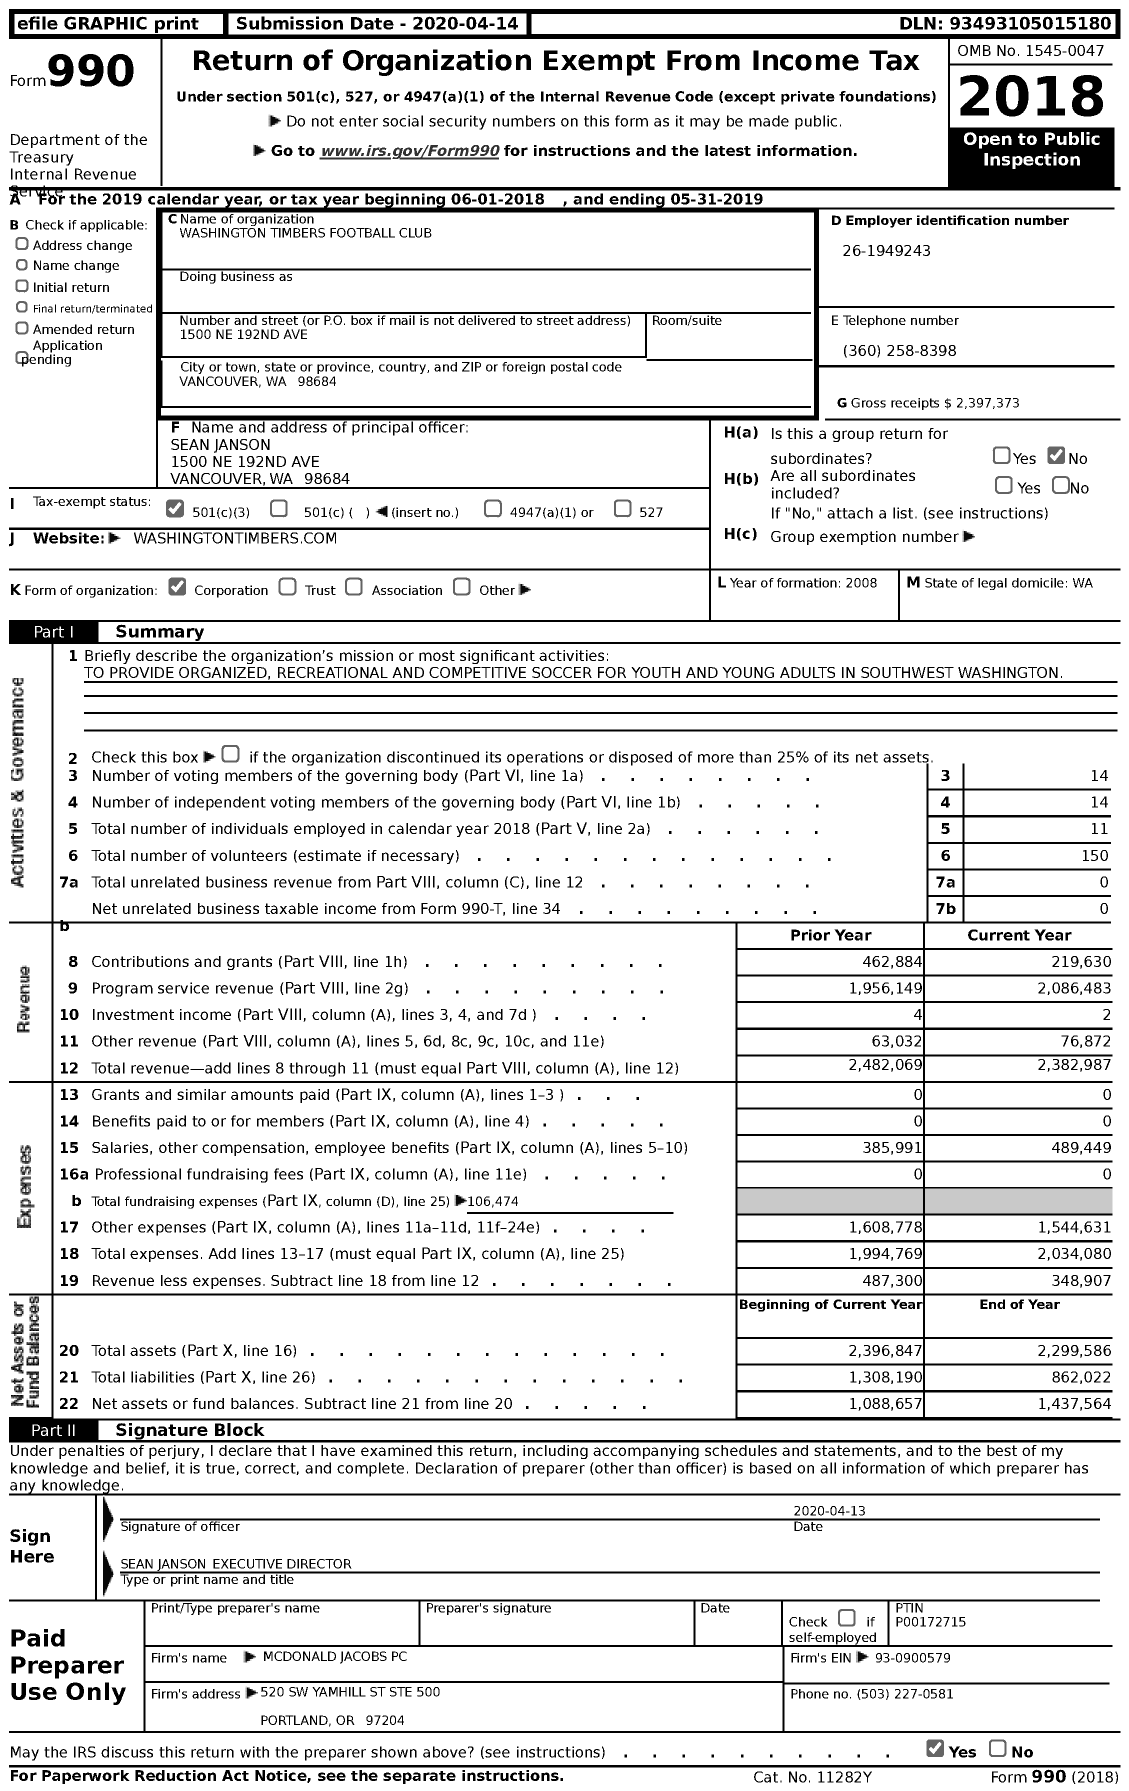 Image of first page of 2018 Form 990 for Washington Timbers Football Club